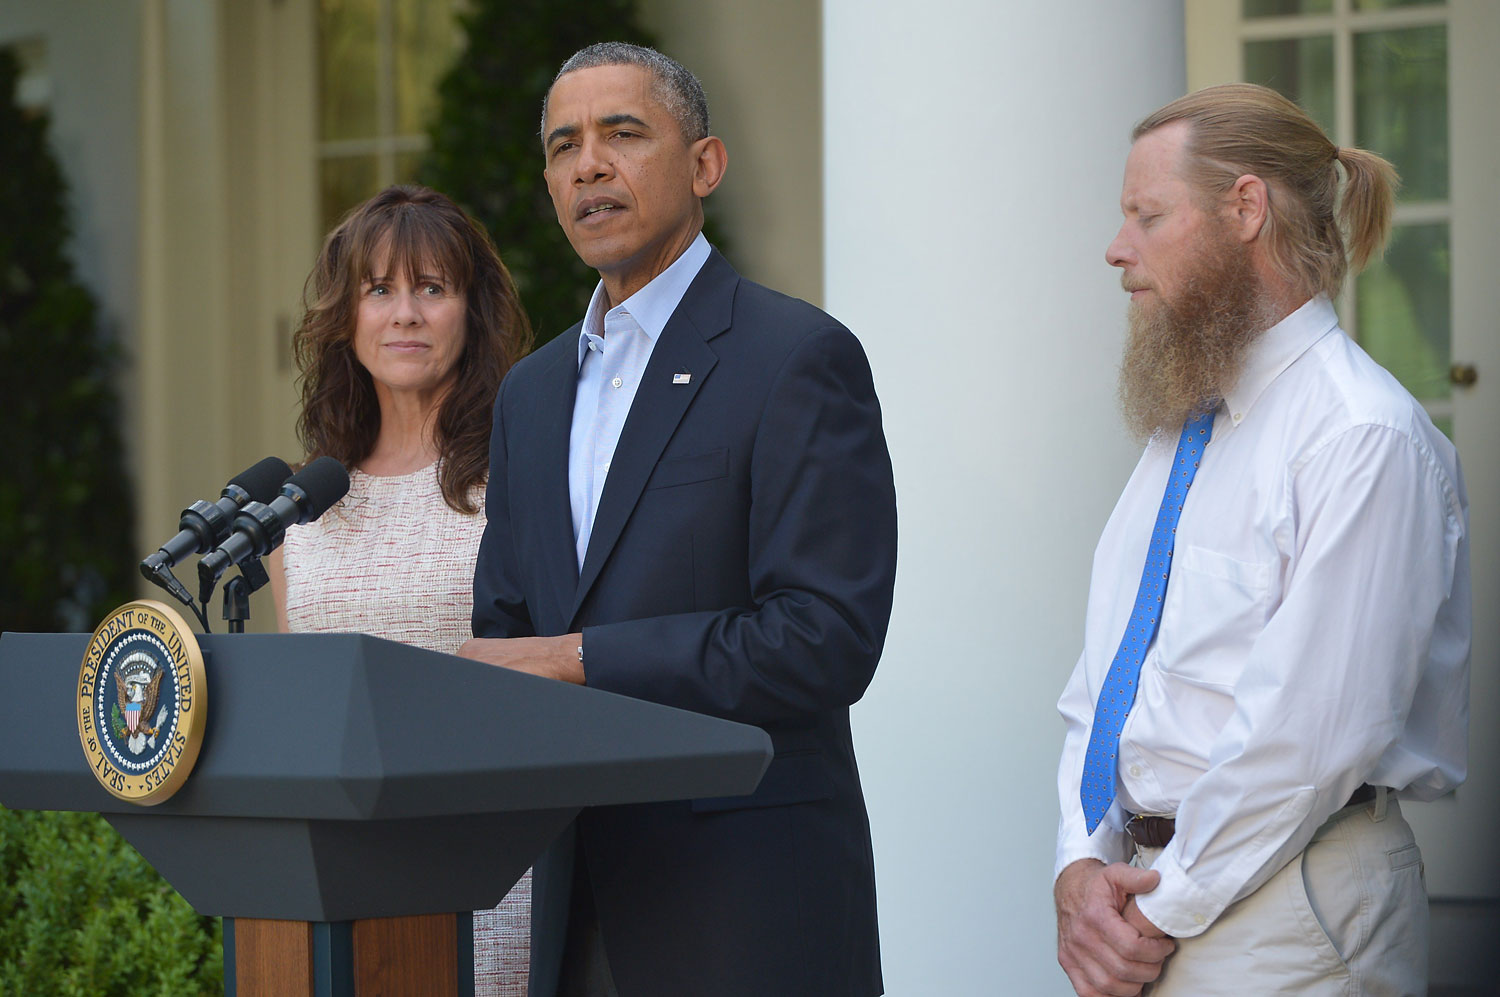 President Barack Obama speaks with Jani Bergdahl, left, and Bob Bergdahl, right, the parents of U.S. Army Sgt. Bowe Bergdahl, in the Rose Garden of the White House in Washington, after the announcement that Bowe Bergdahl has been released from captivity, May 31, 2014. (Ngan Mandel—AFP/Getty Images)